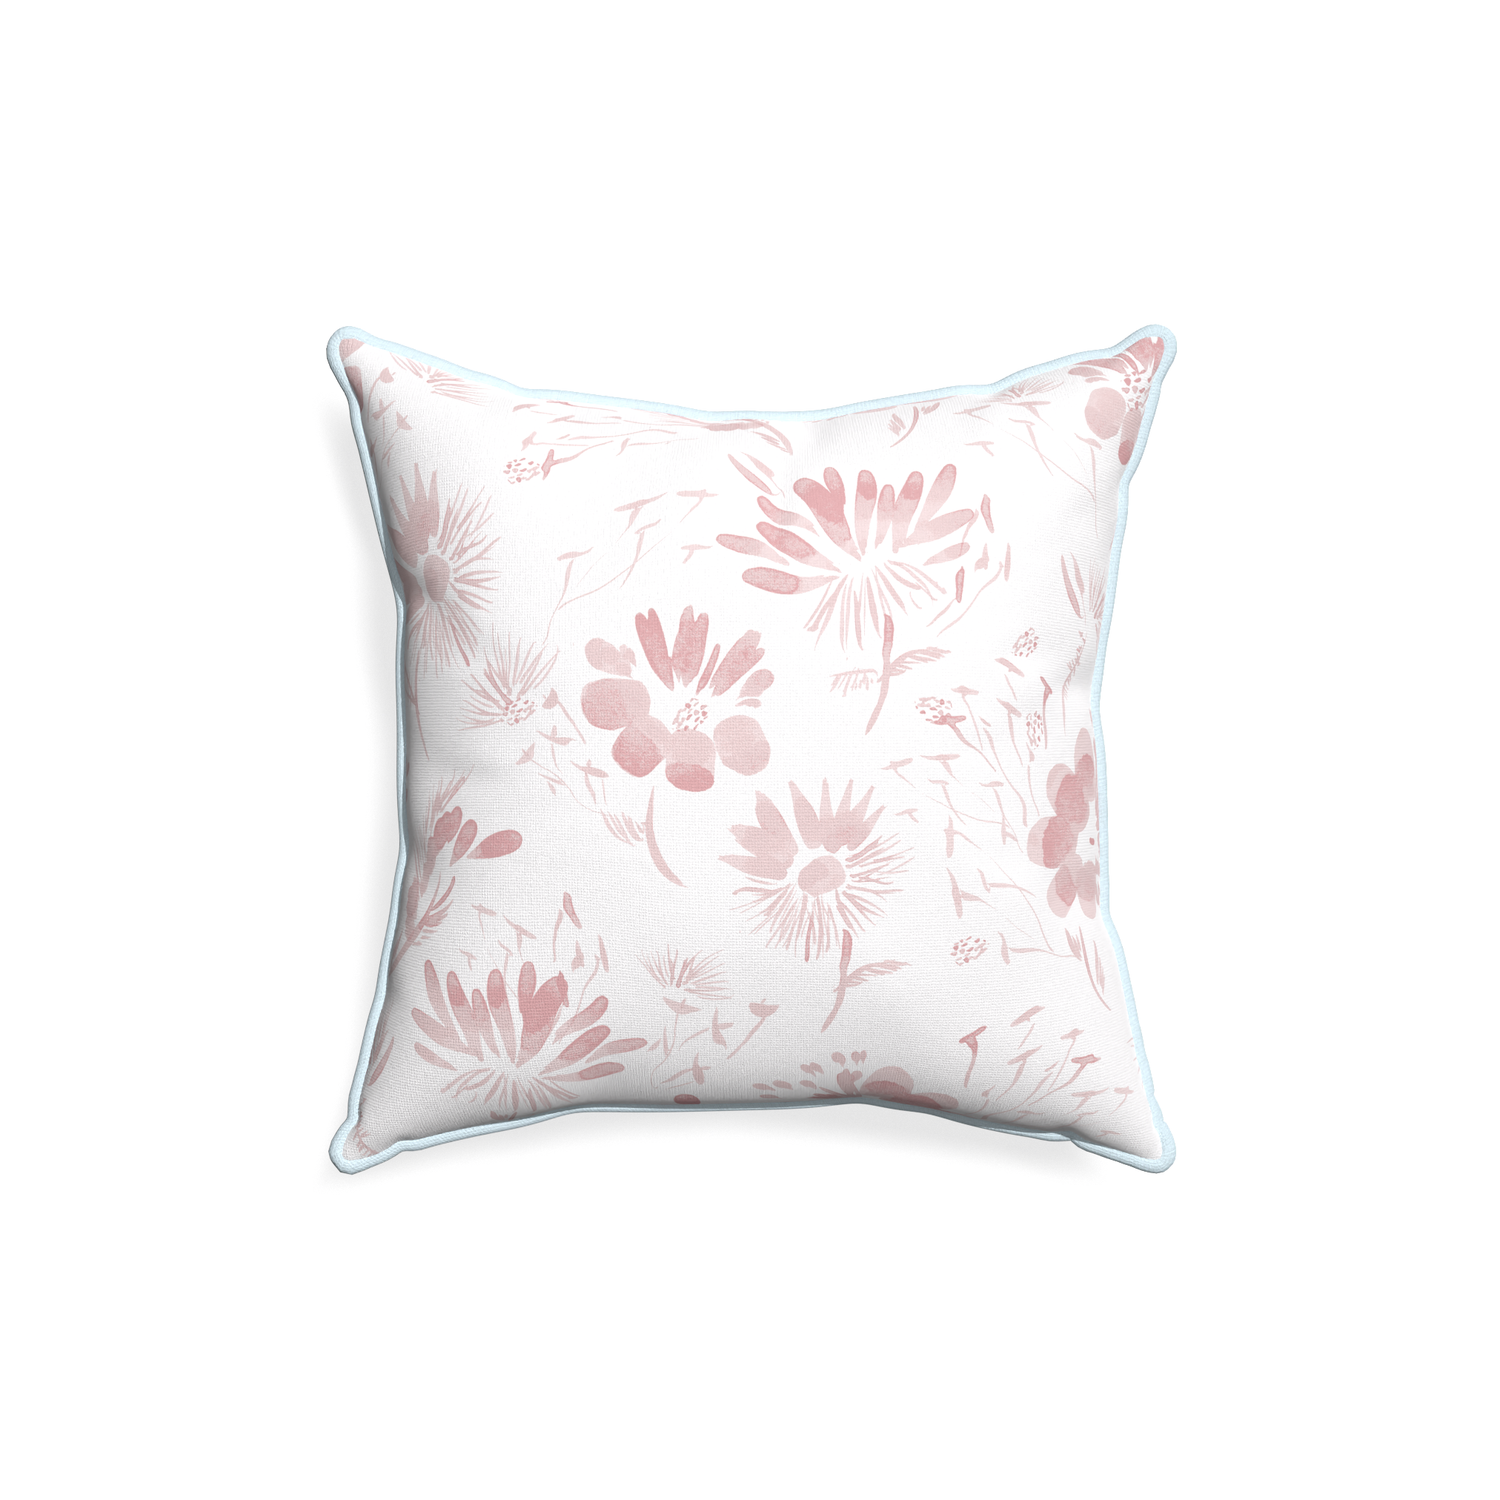 18-square blake custom pink floralpillow with powder piping on white background